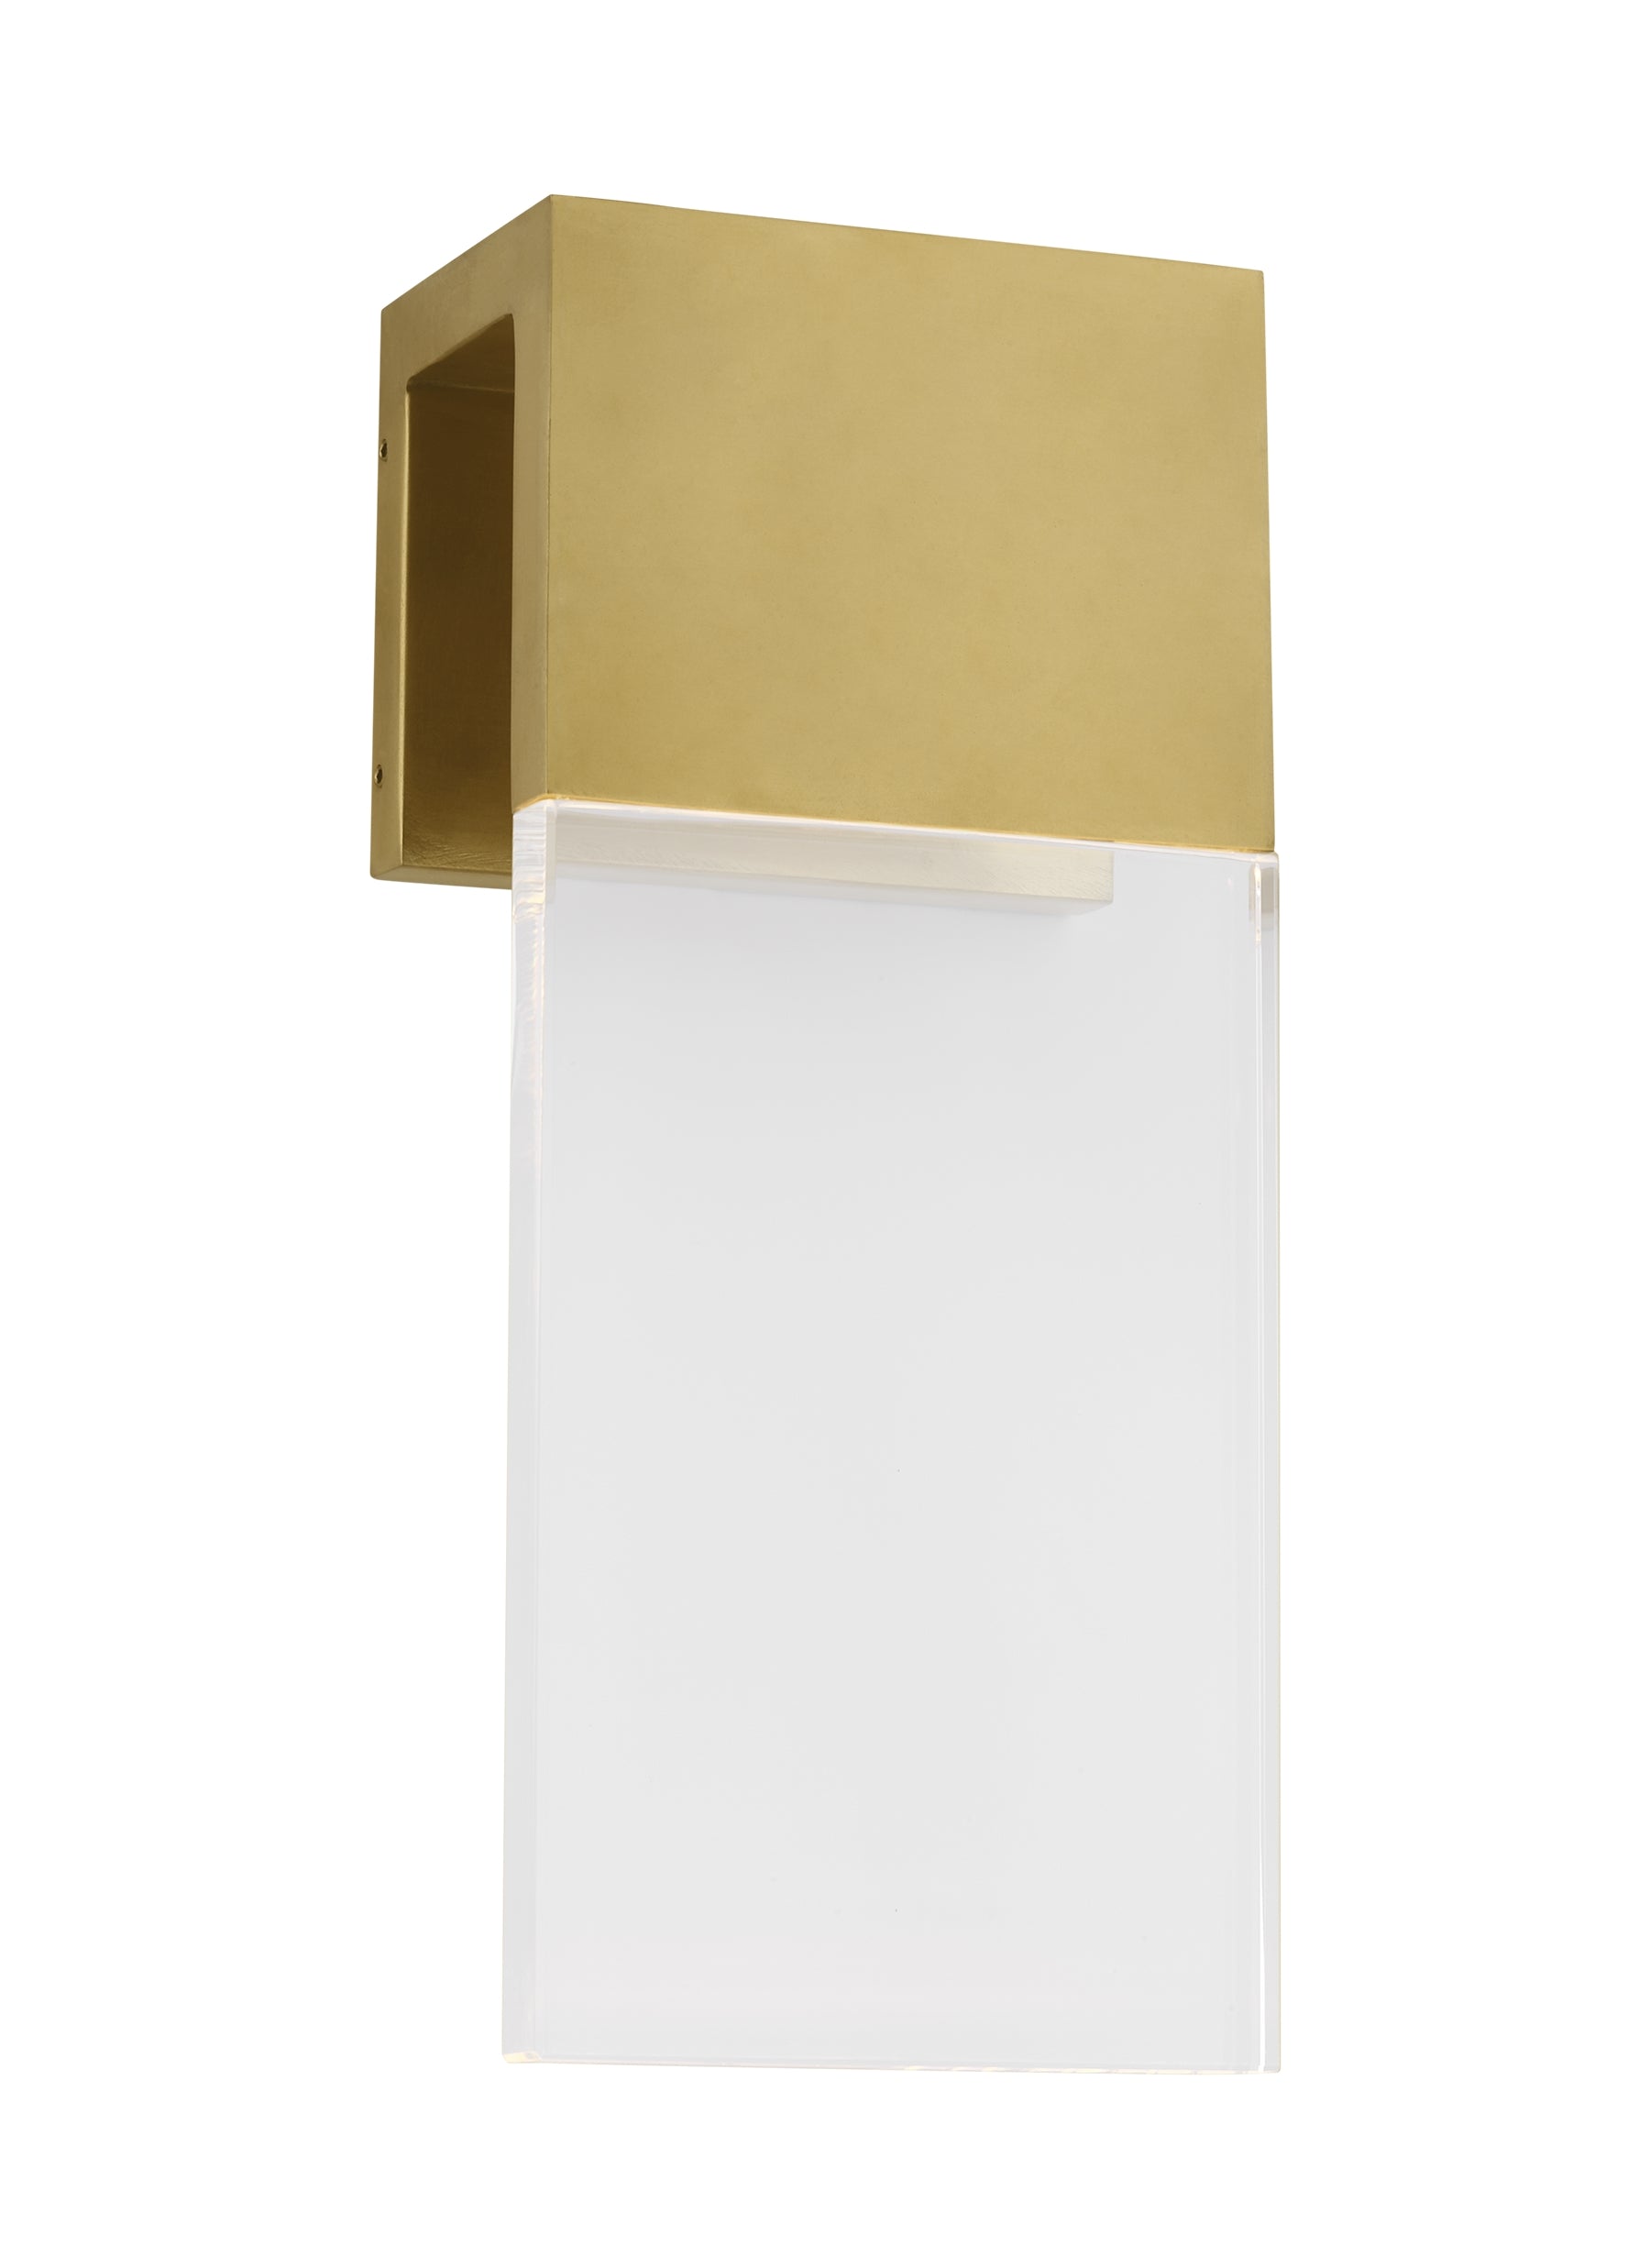 Contemporary Geometric Wall Sconce for Home Decor